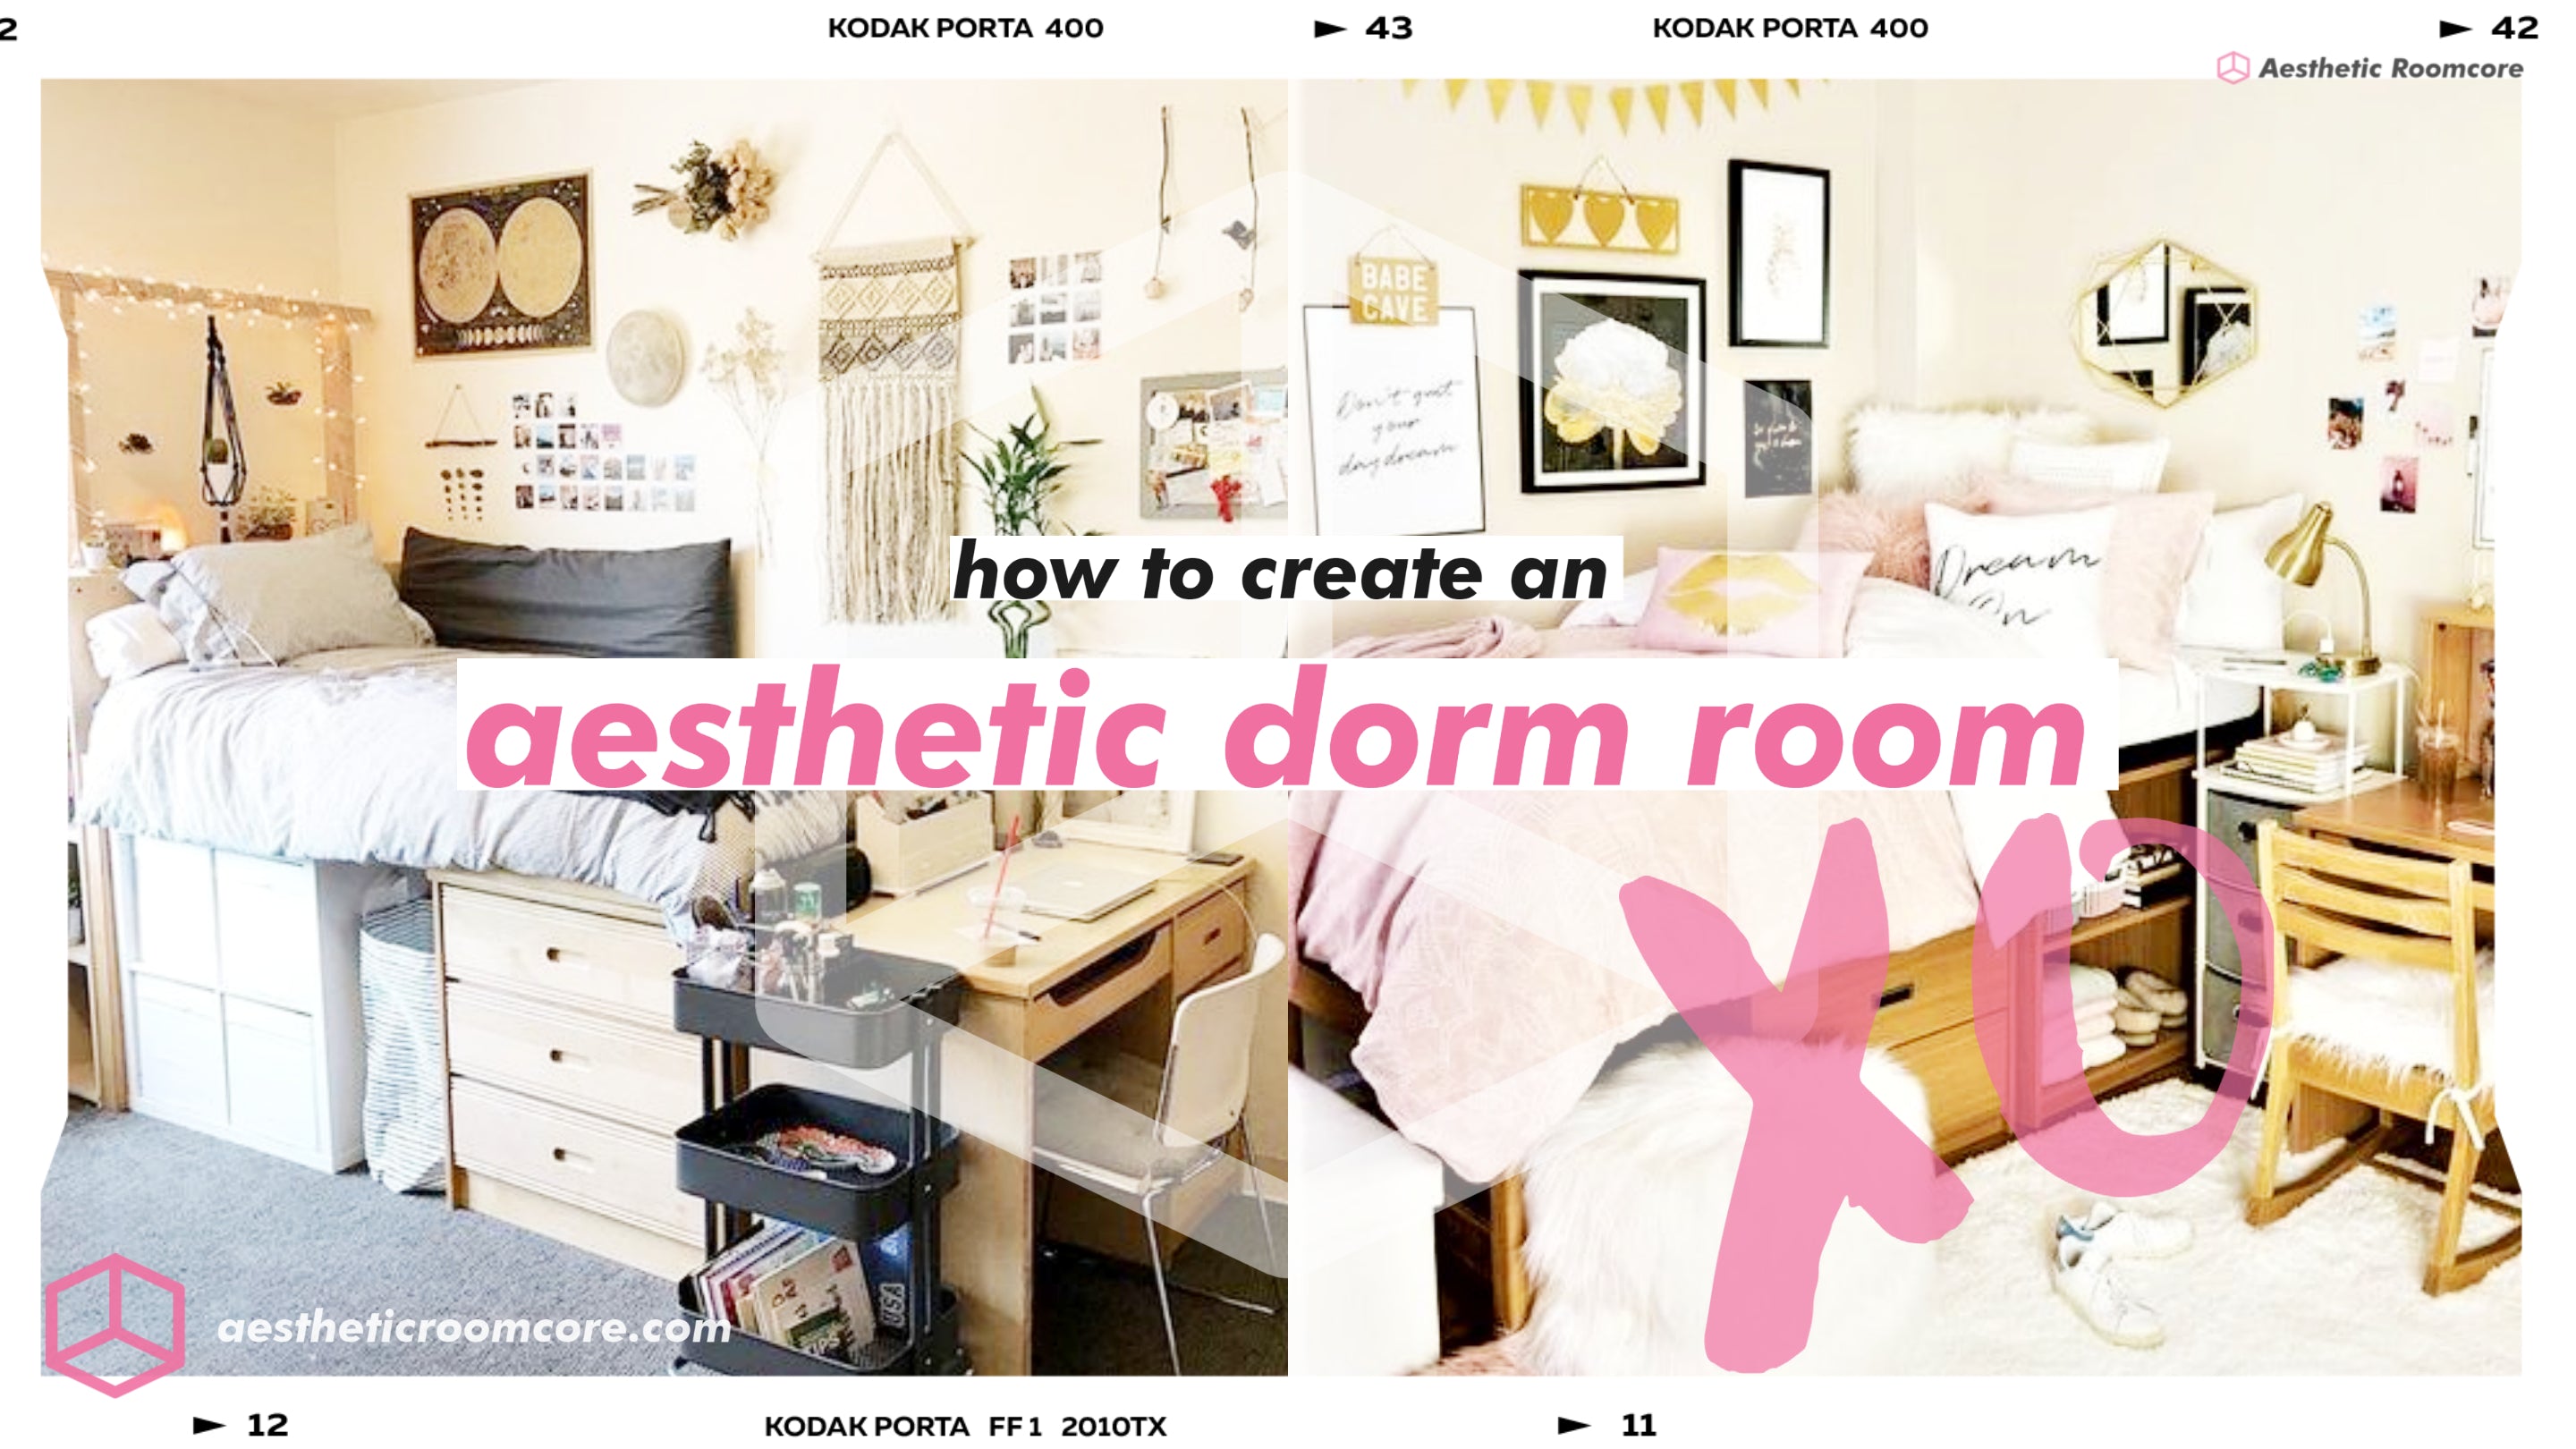 Customize this Aesthetic Dream and Repeat Motivational Desktop